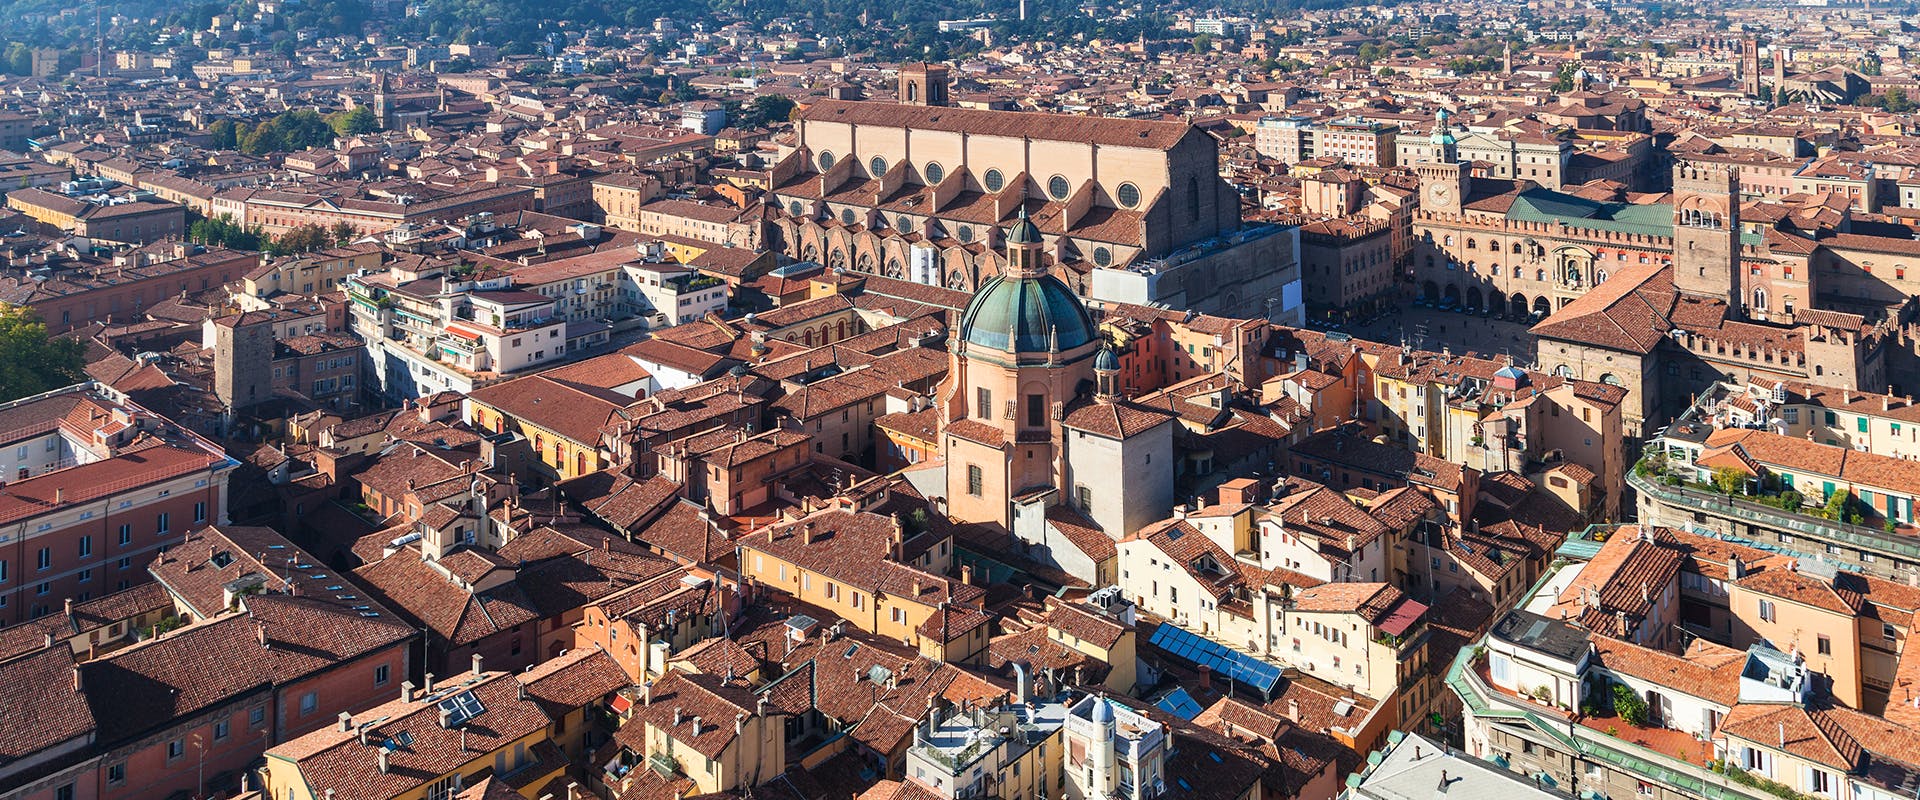 view of bologna from above